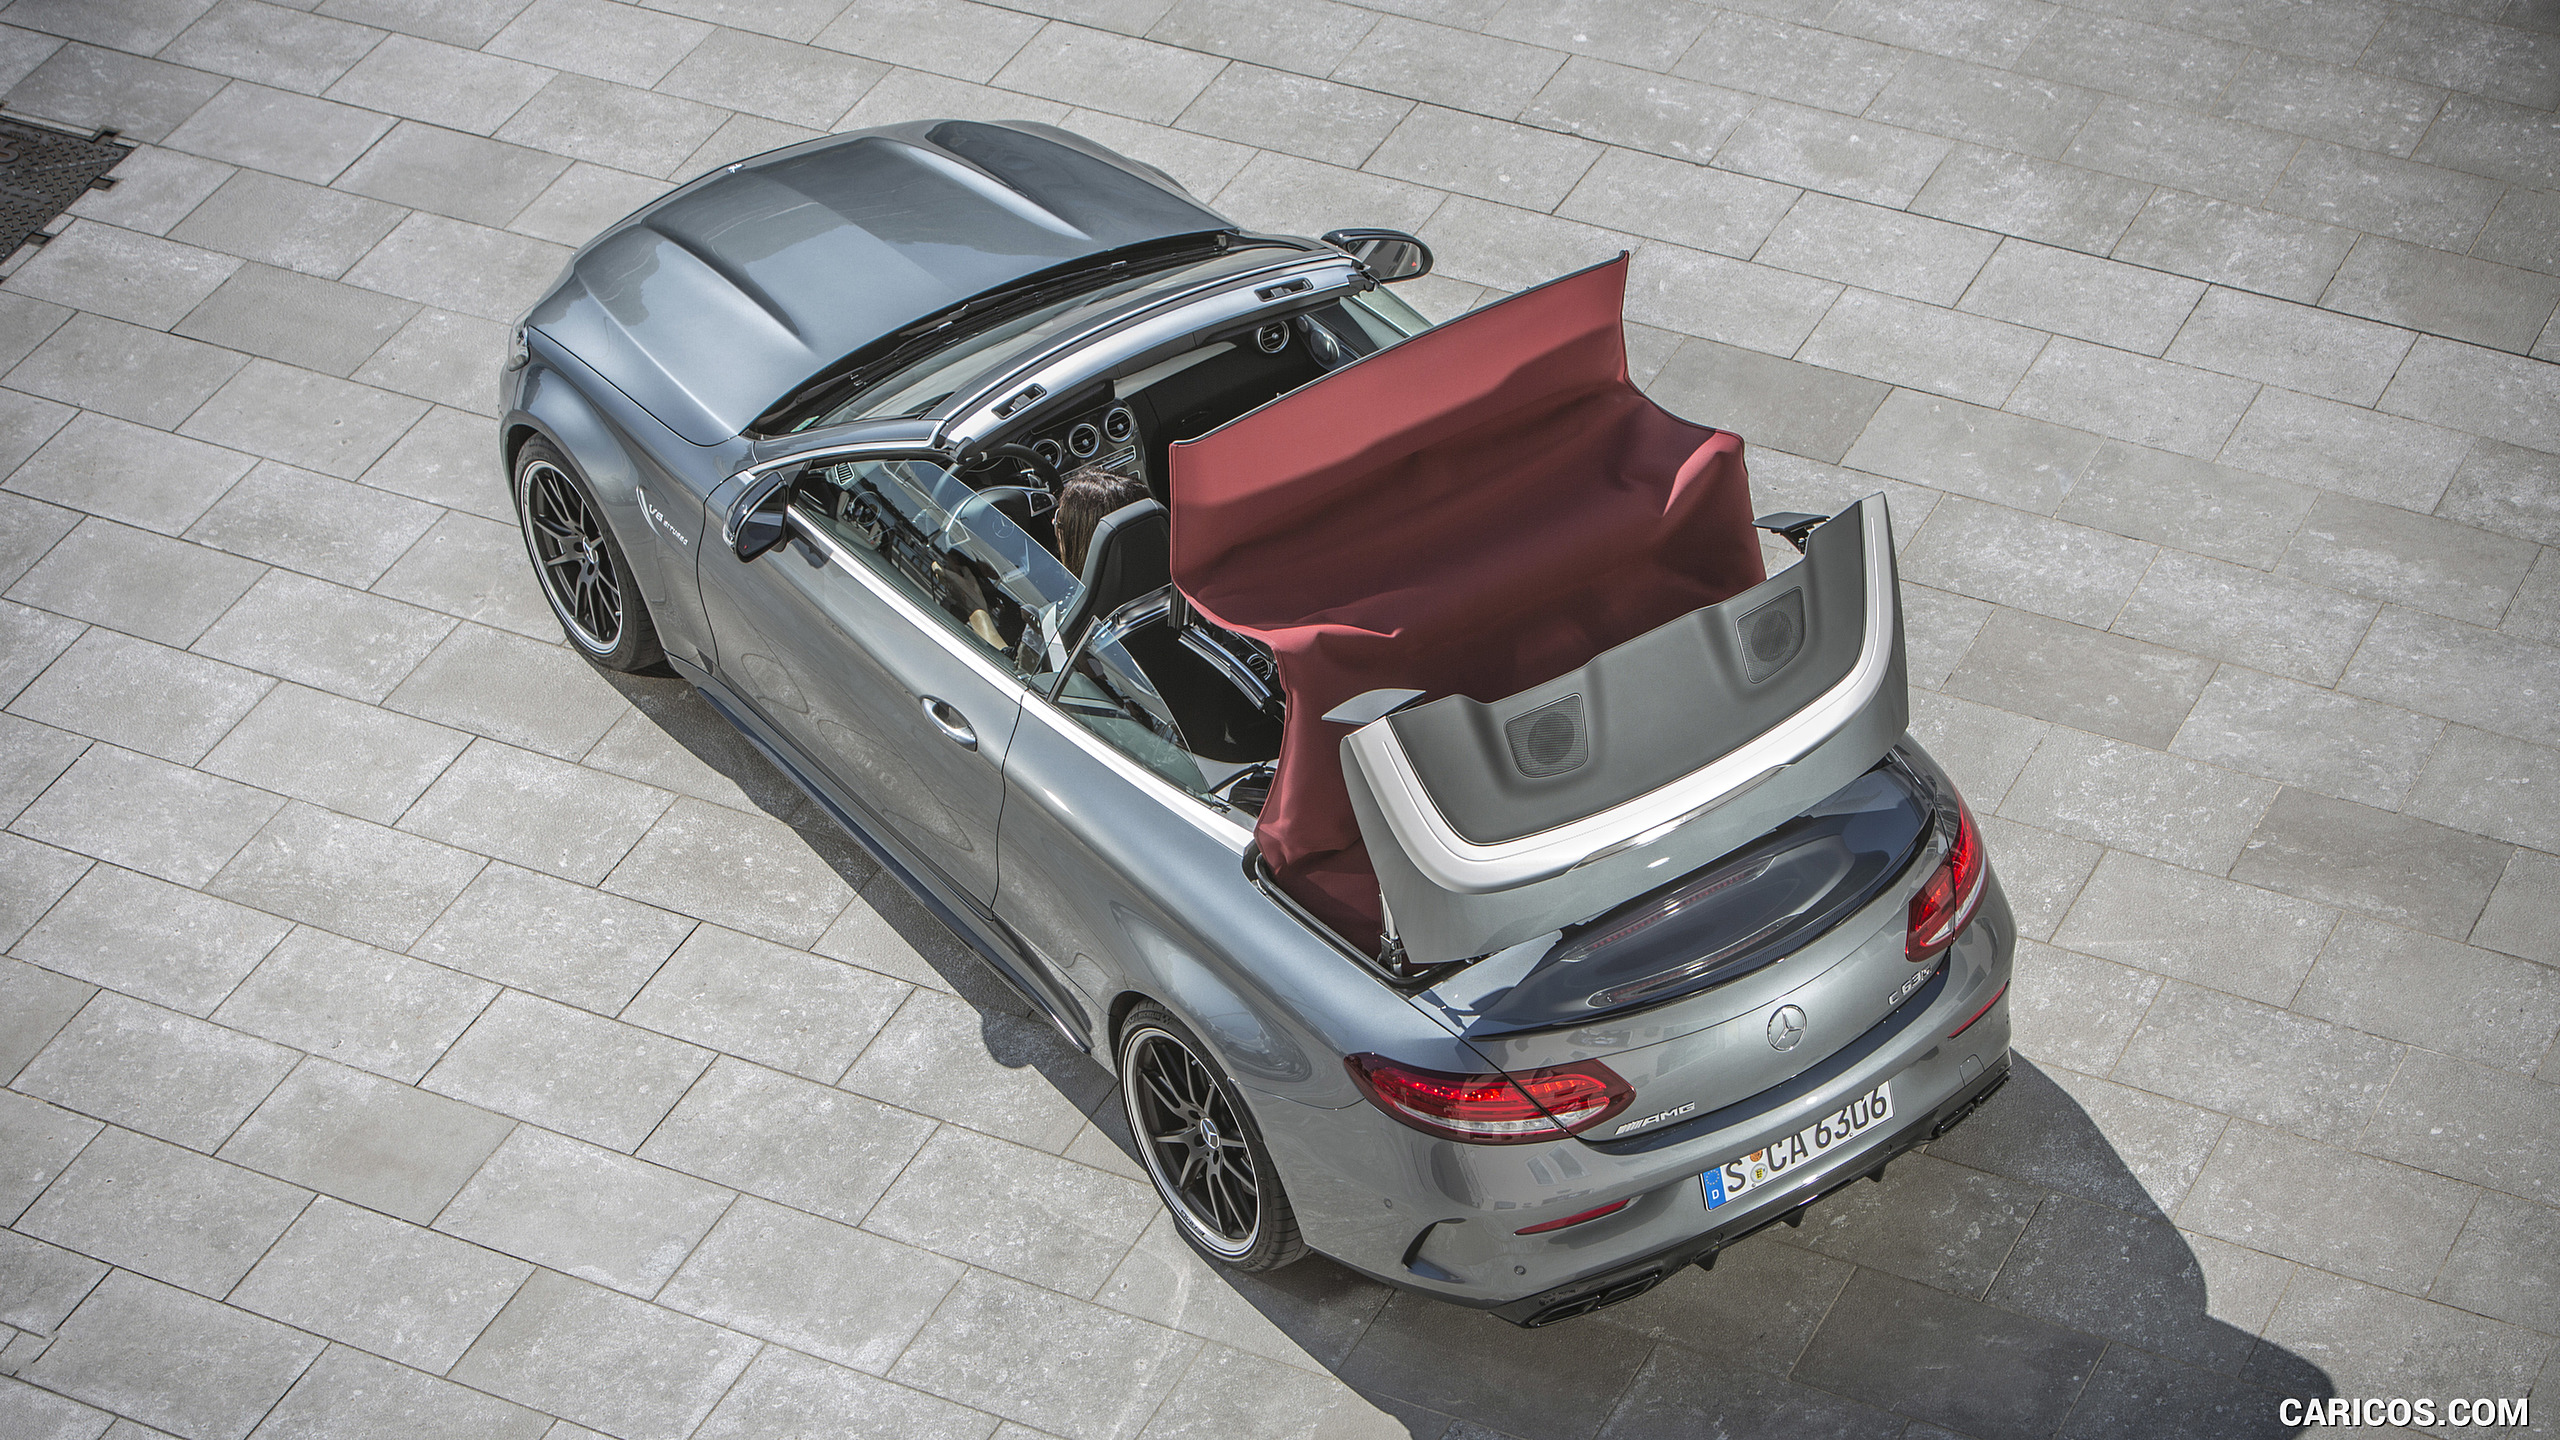 2017 Mercedes-AMG C63 S Cabriolet - Top, #63 of 222